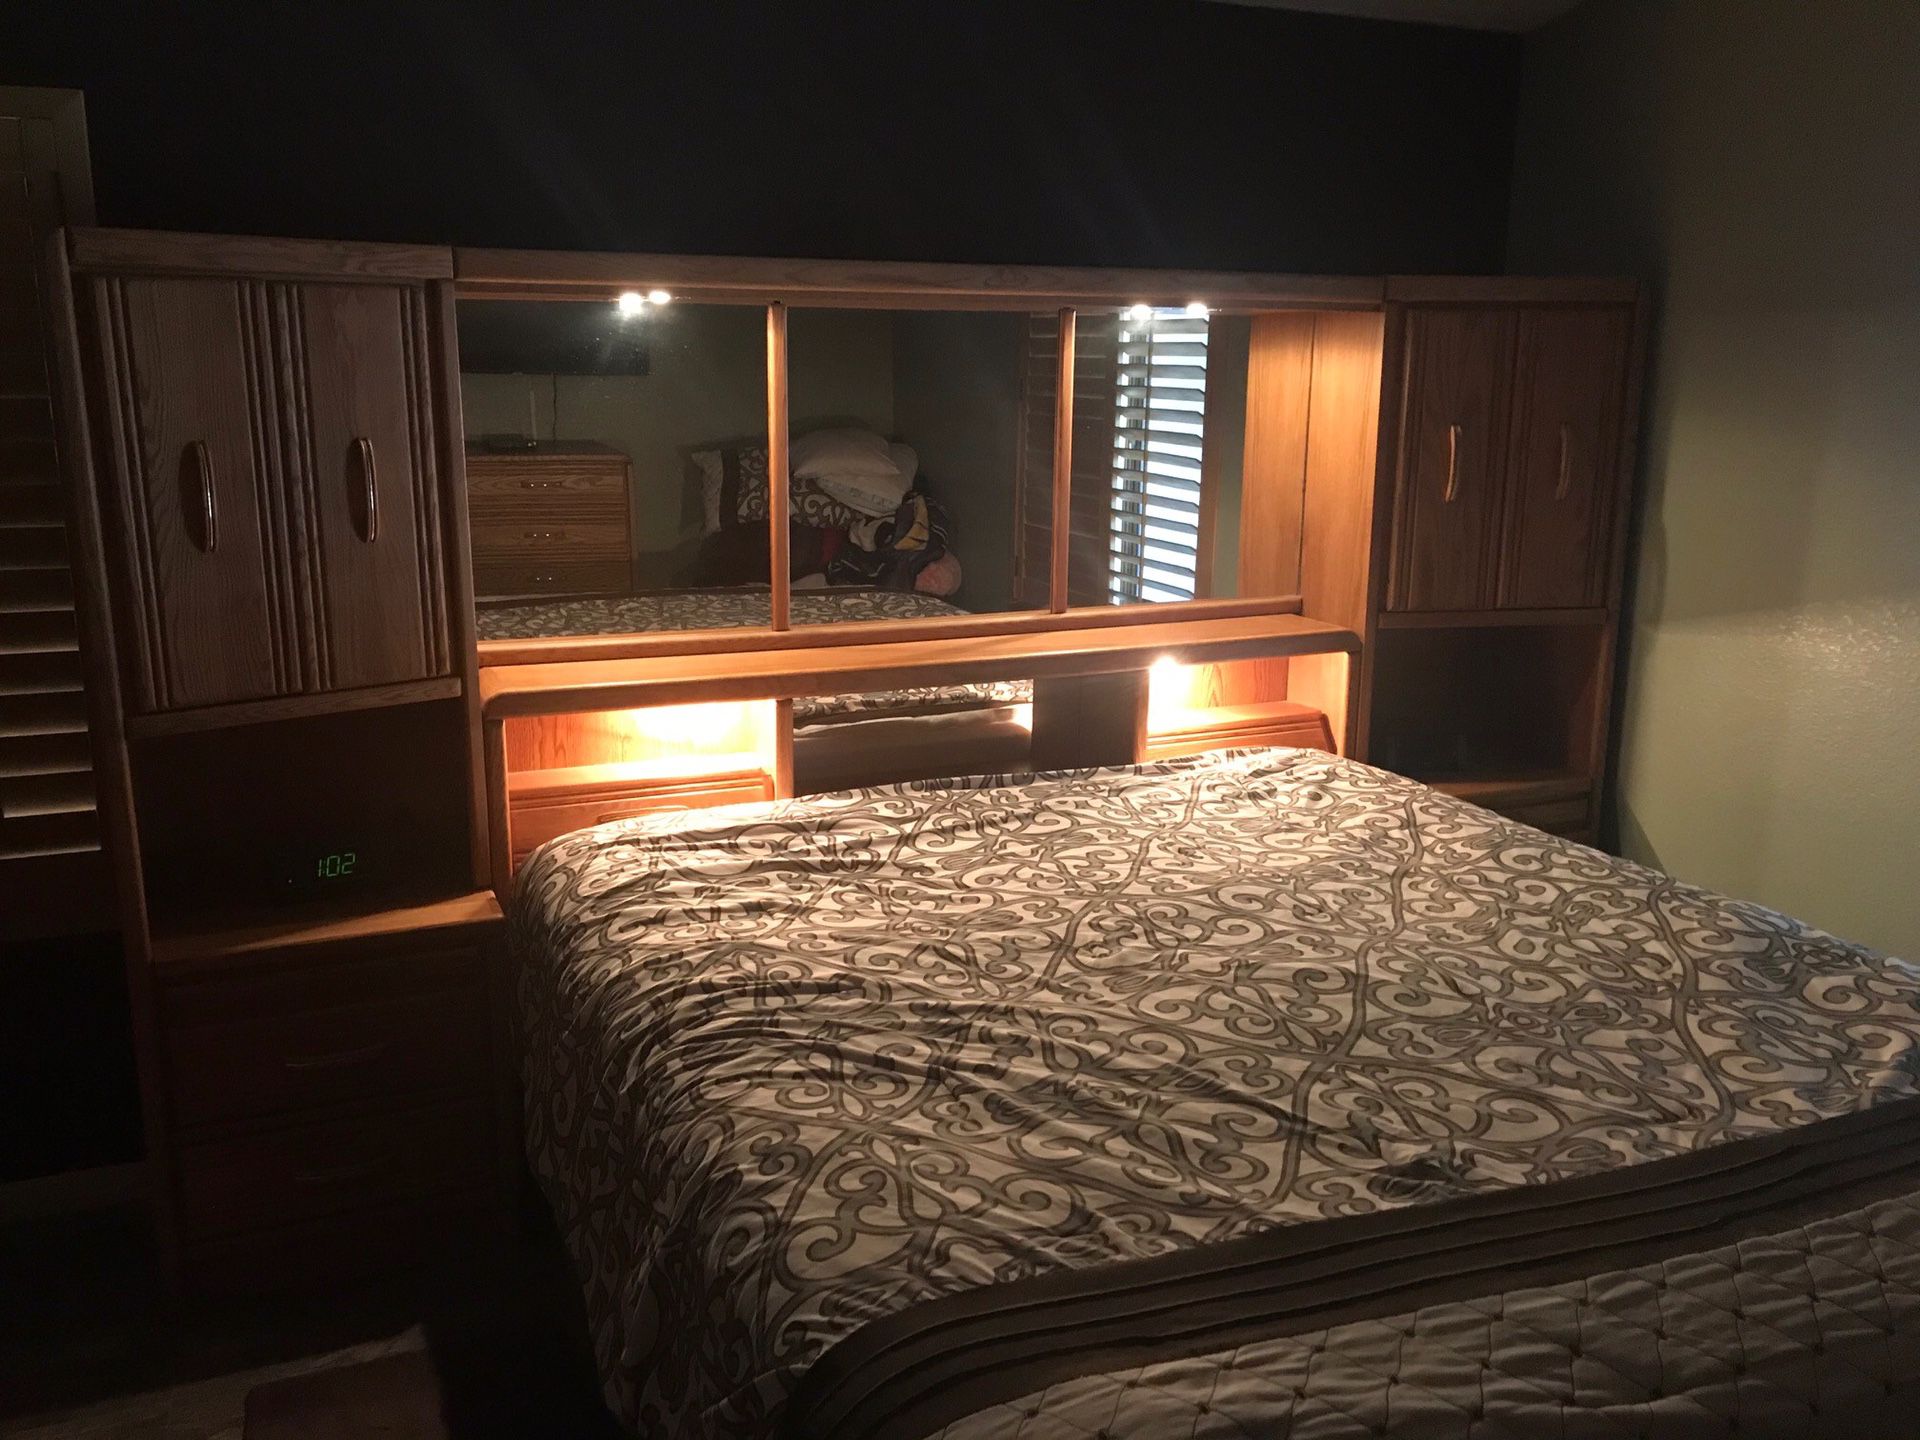 $250!!! Bedroom Set Includes Mattress and Box Springs!! (Frame not included)...